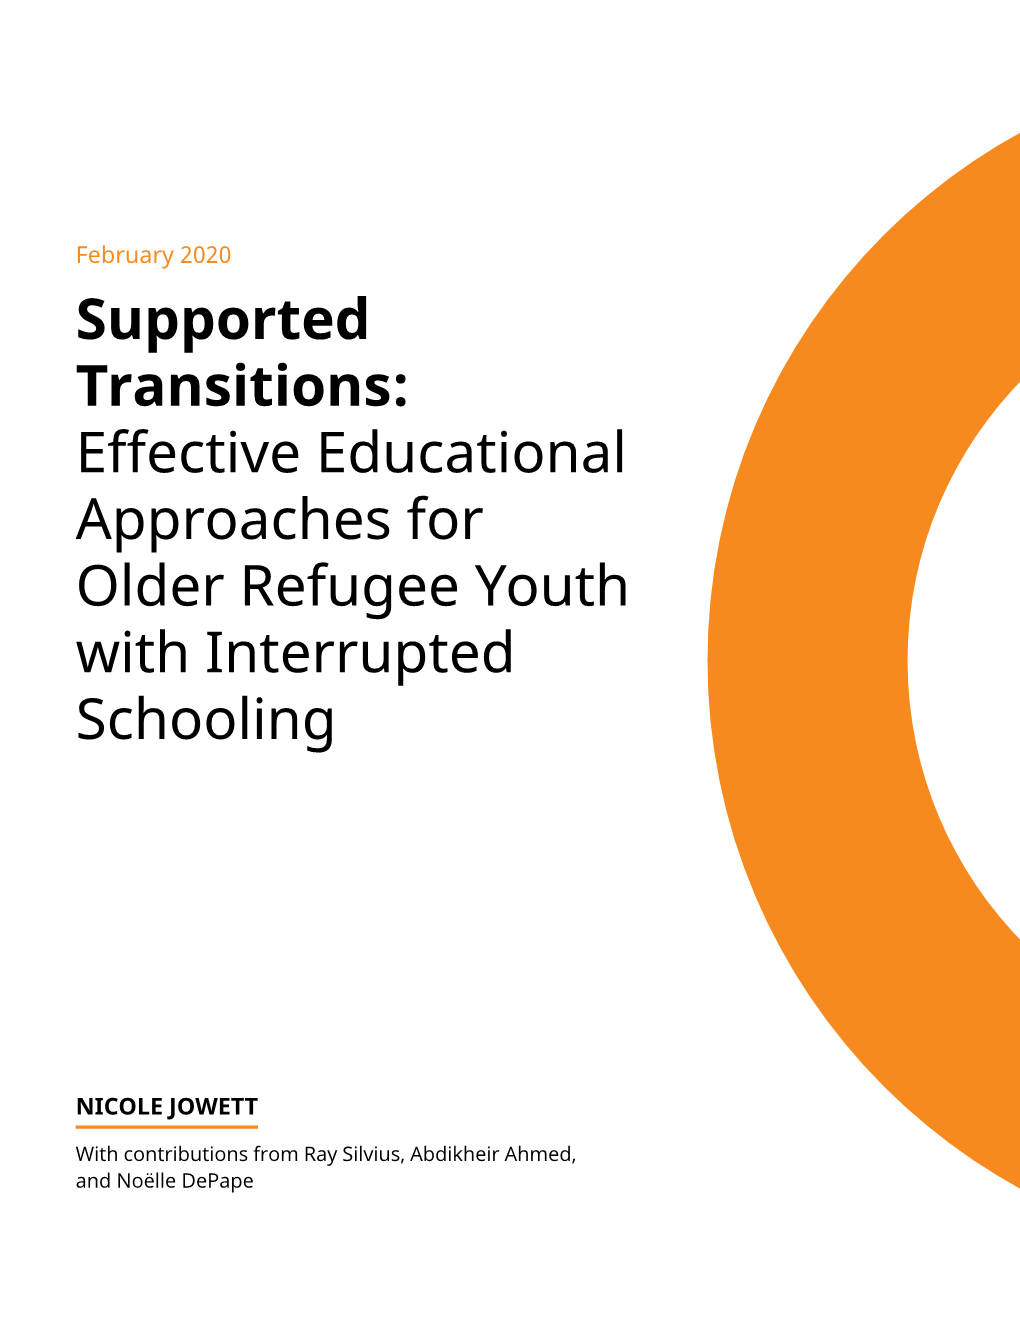 Effective Educational Approaches for Older Refugee Youth with Interrupted Schooling